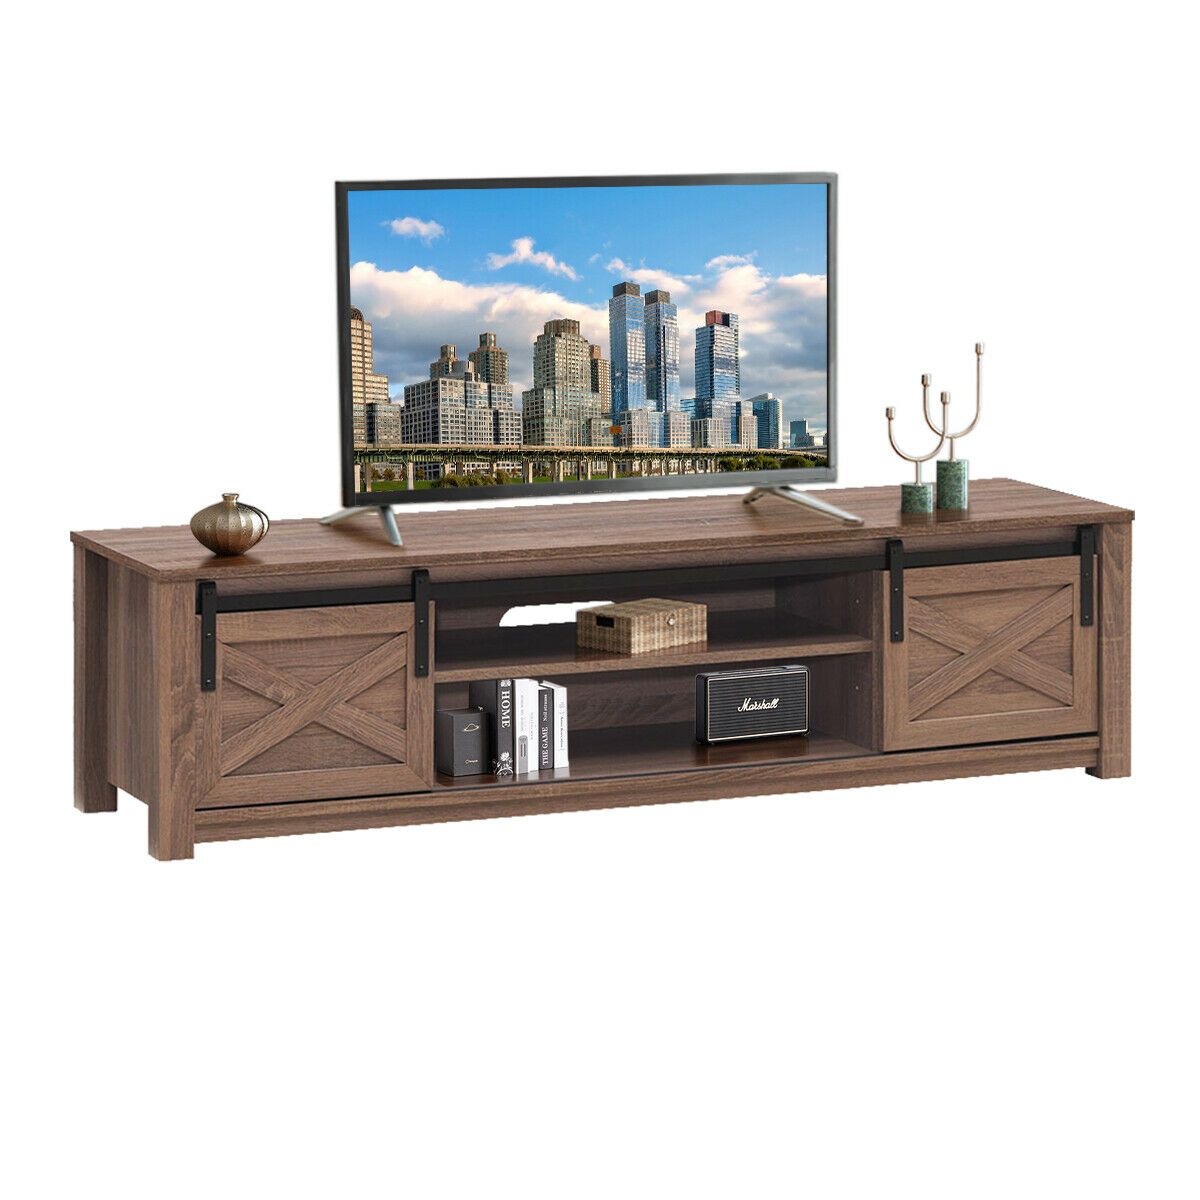 Gymax Sliding Barn Door Tv Stand For Tv's Up To 65 Pertaining To Wolla Tv Stands For Tvs Up To 65" (View 4 of 15)